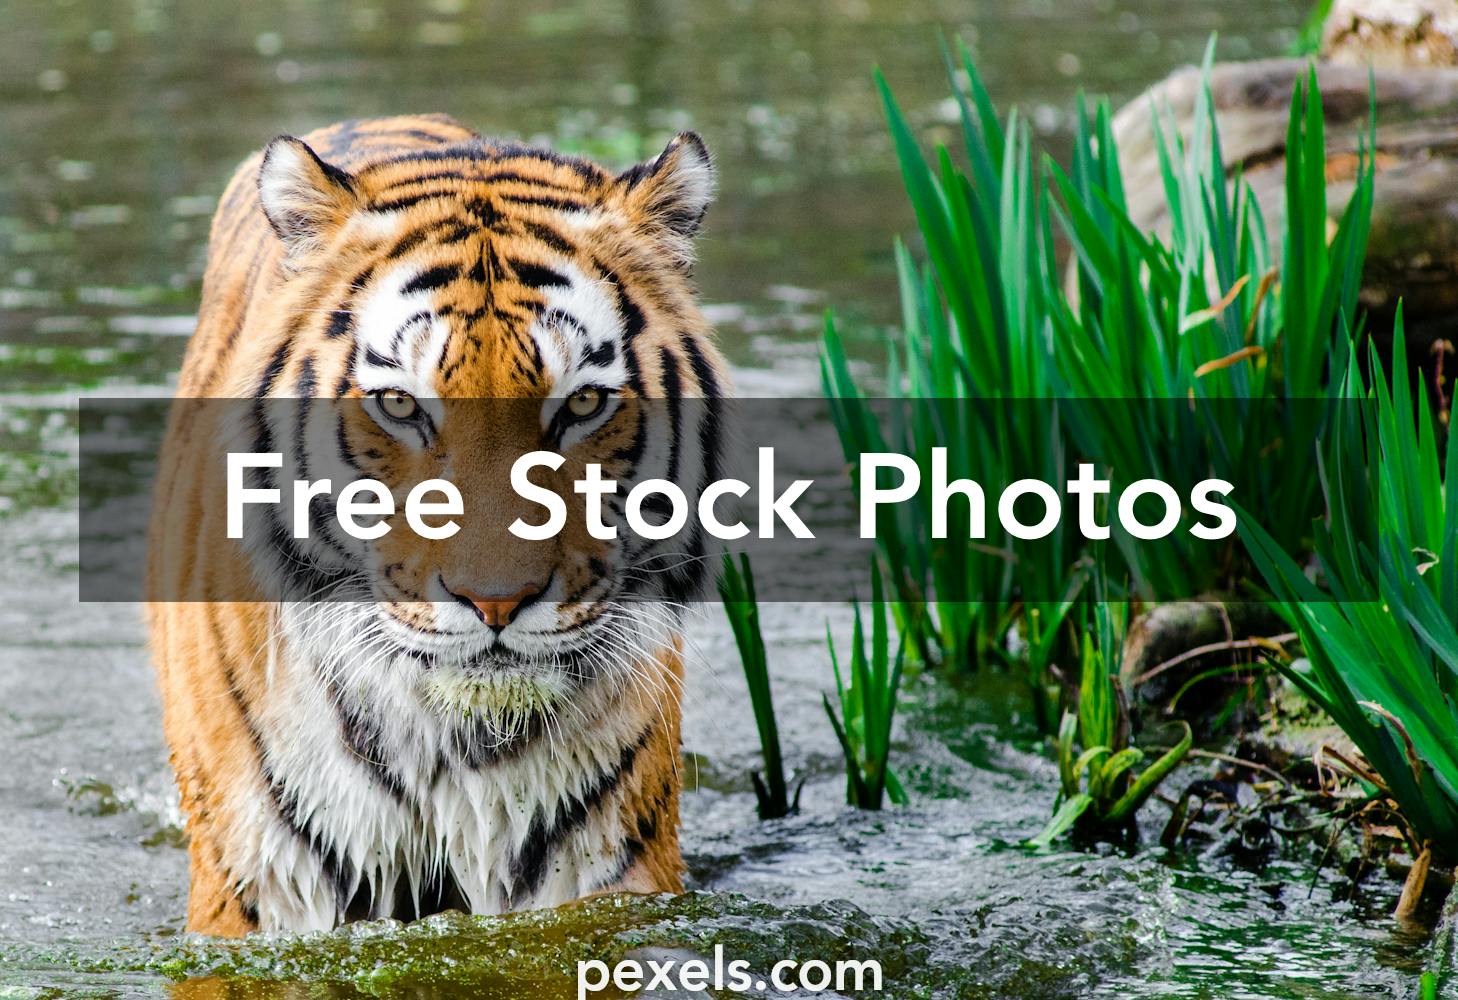 50-000-best-animal-pictures-100-free-download-pexels-stock-photos